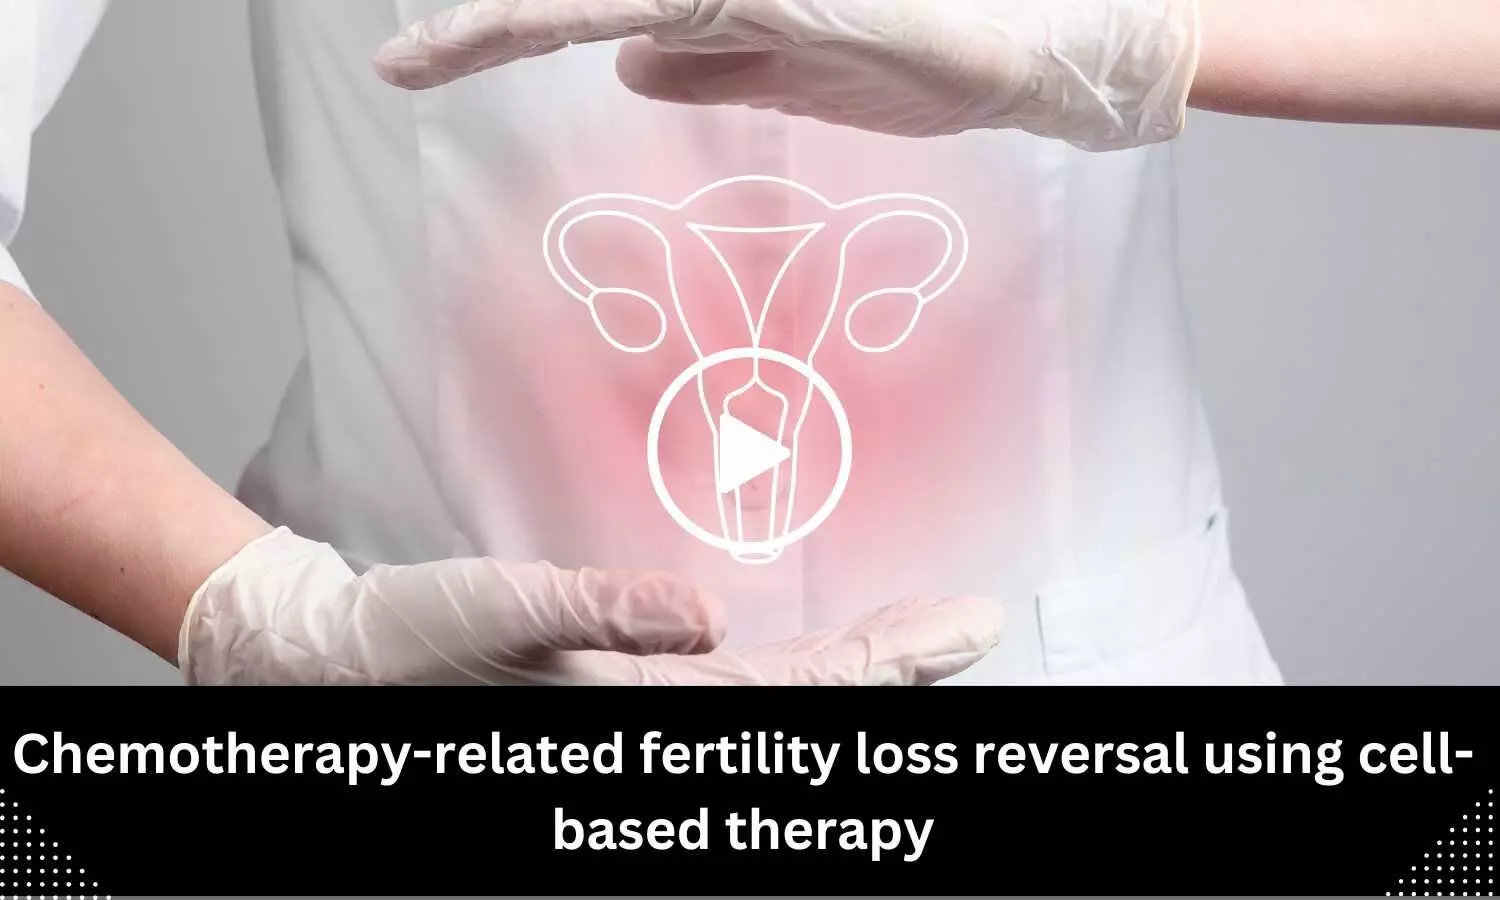 Chemotherapy-related fertility loss reversal using cell-based therapy